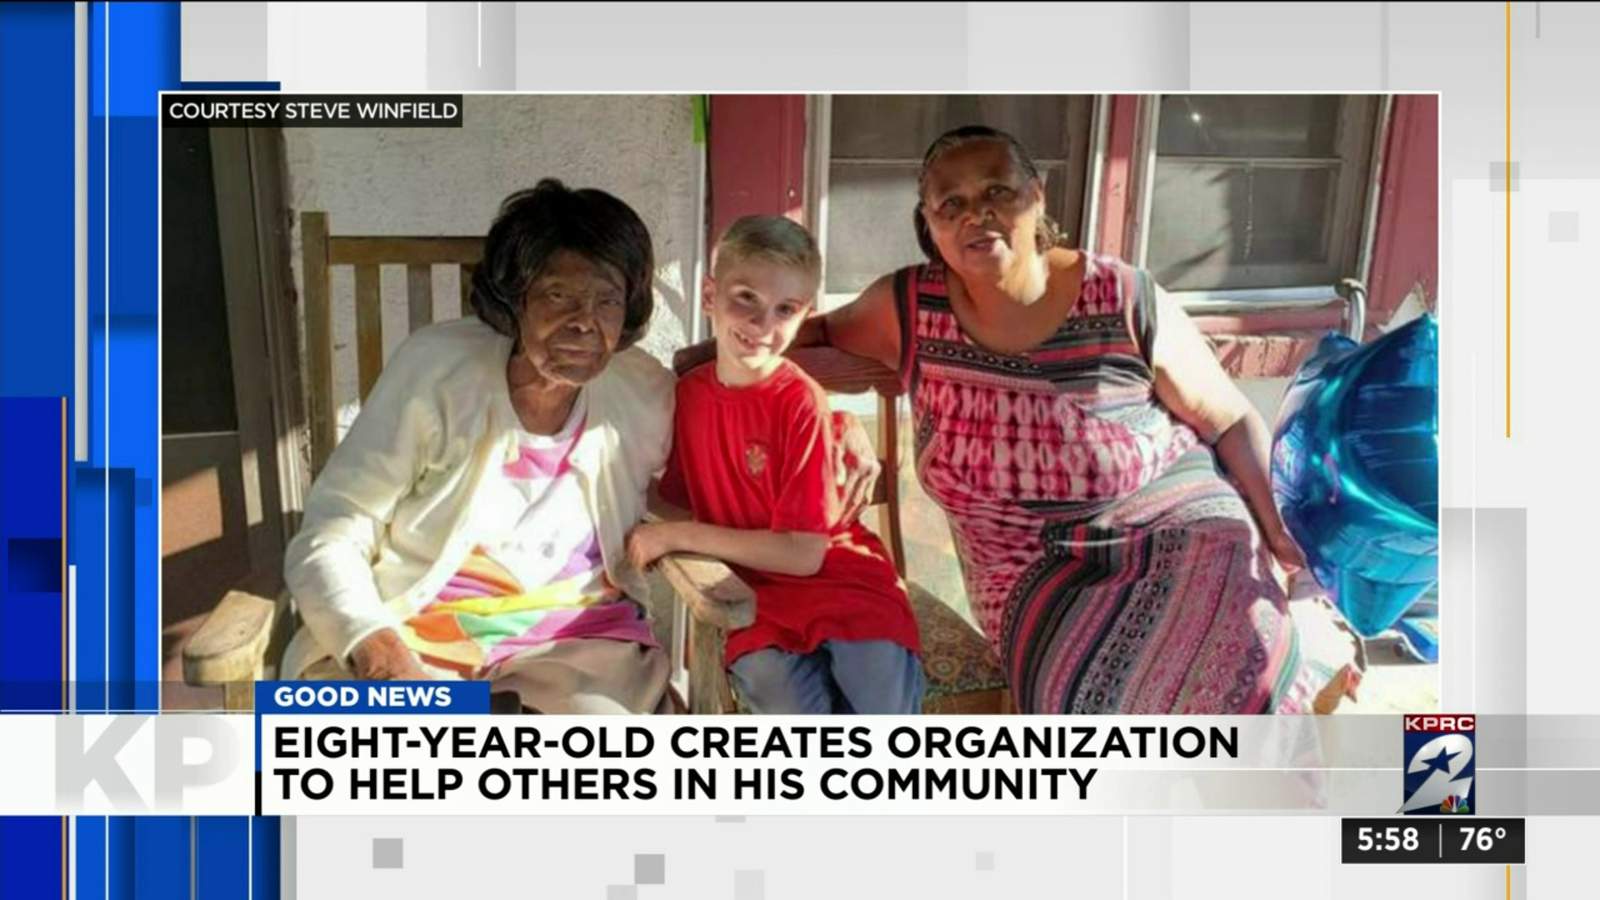 One Good Thing: 8-year-old creates organization to help others in his community